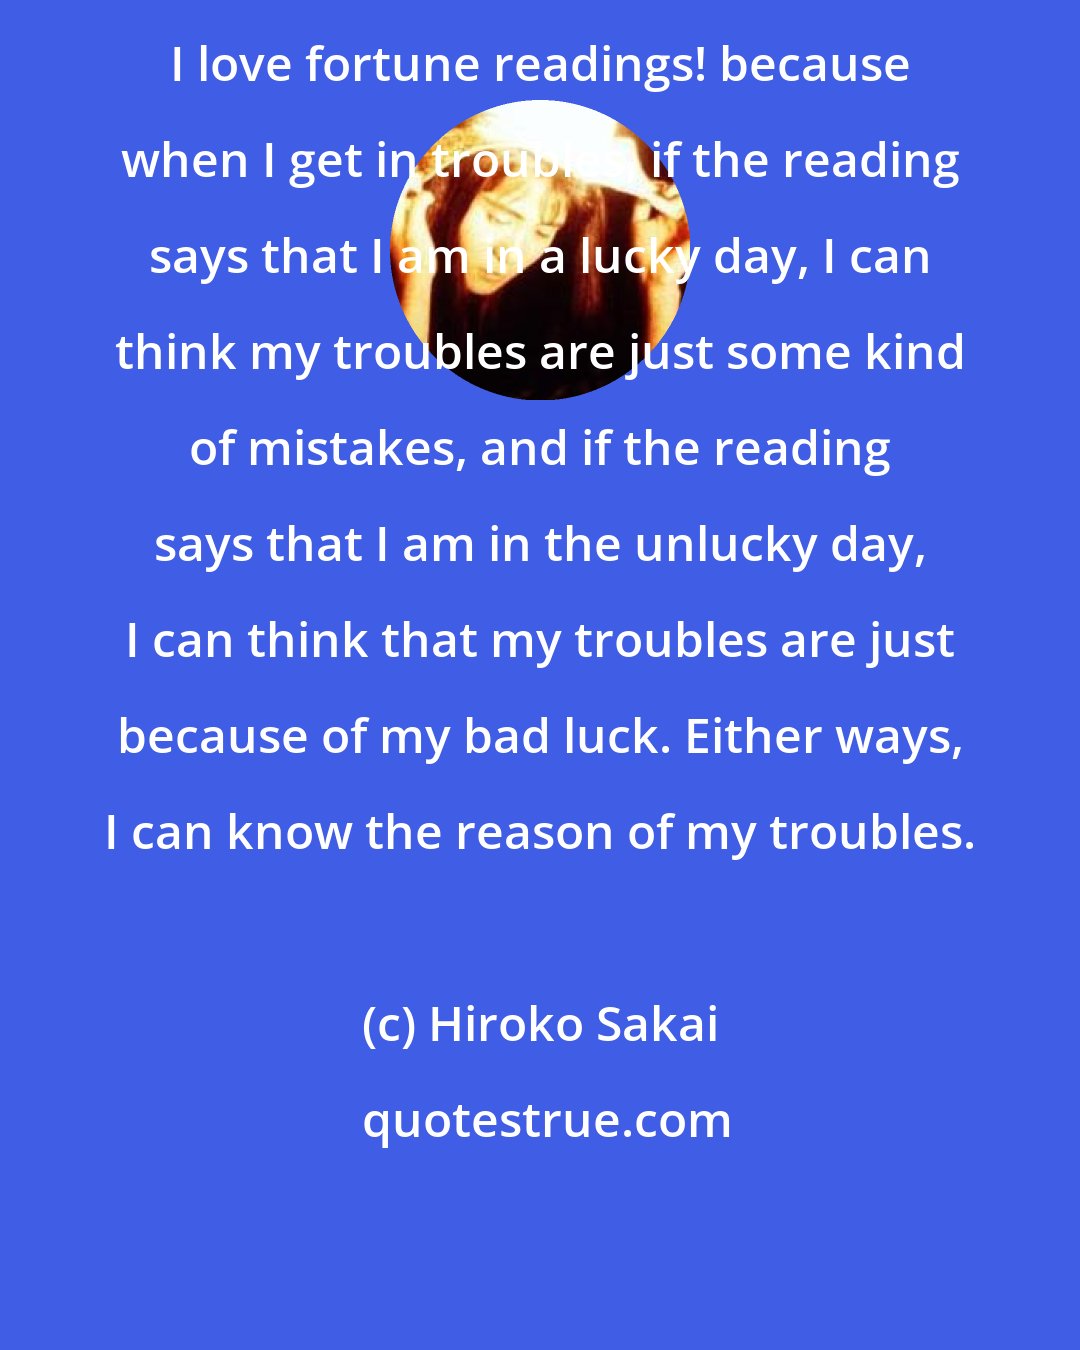 Hiroko Sakai: I love fortune readings! because when I get in troubles, if the reading says that I am in a lucky day, I can think my troubles are just some kind of mistakes, and if the reading says that I am in the unlucky day, I can think that my troubles are just because of my bad luck. Either ways, I can know the reason of my troubles.